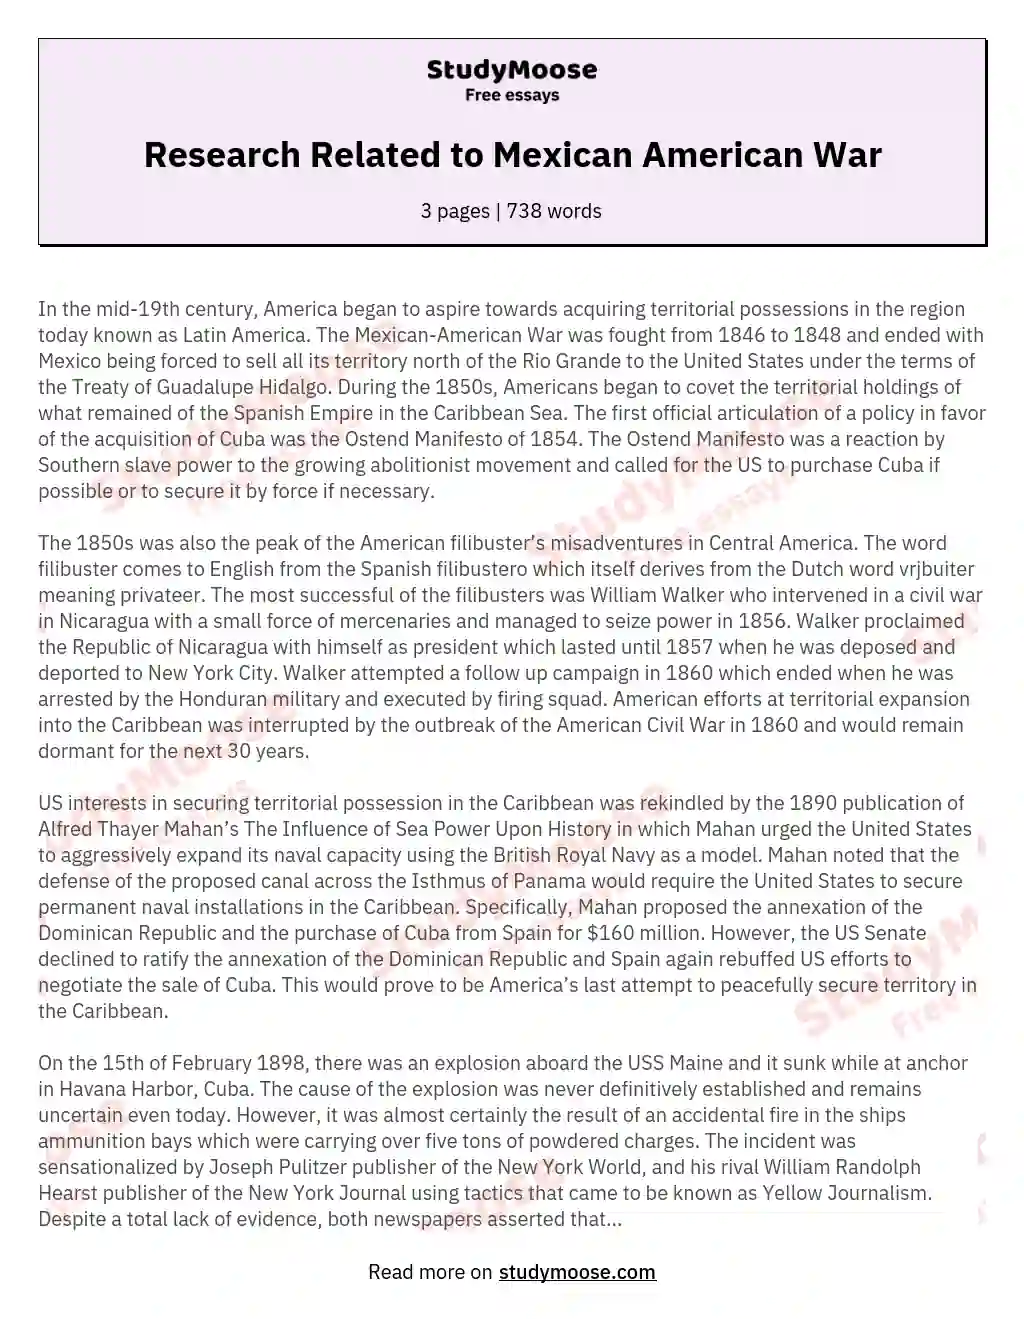 Research Related to Mexican American War essay